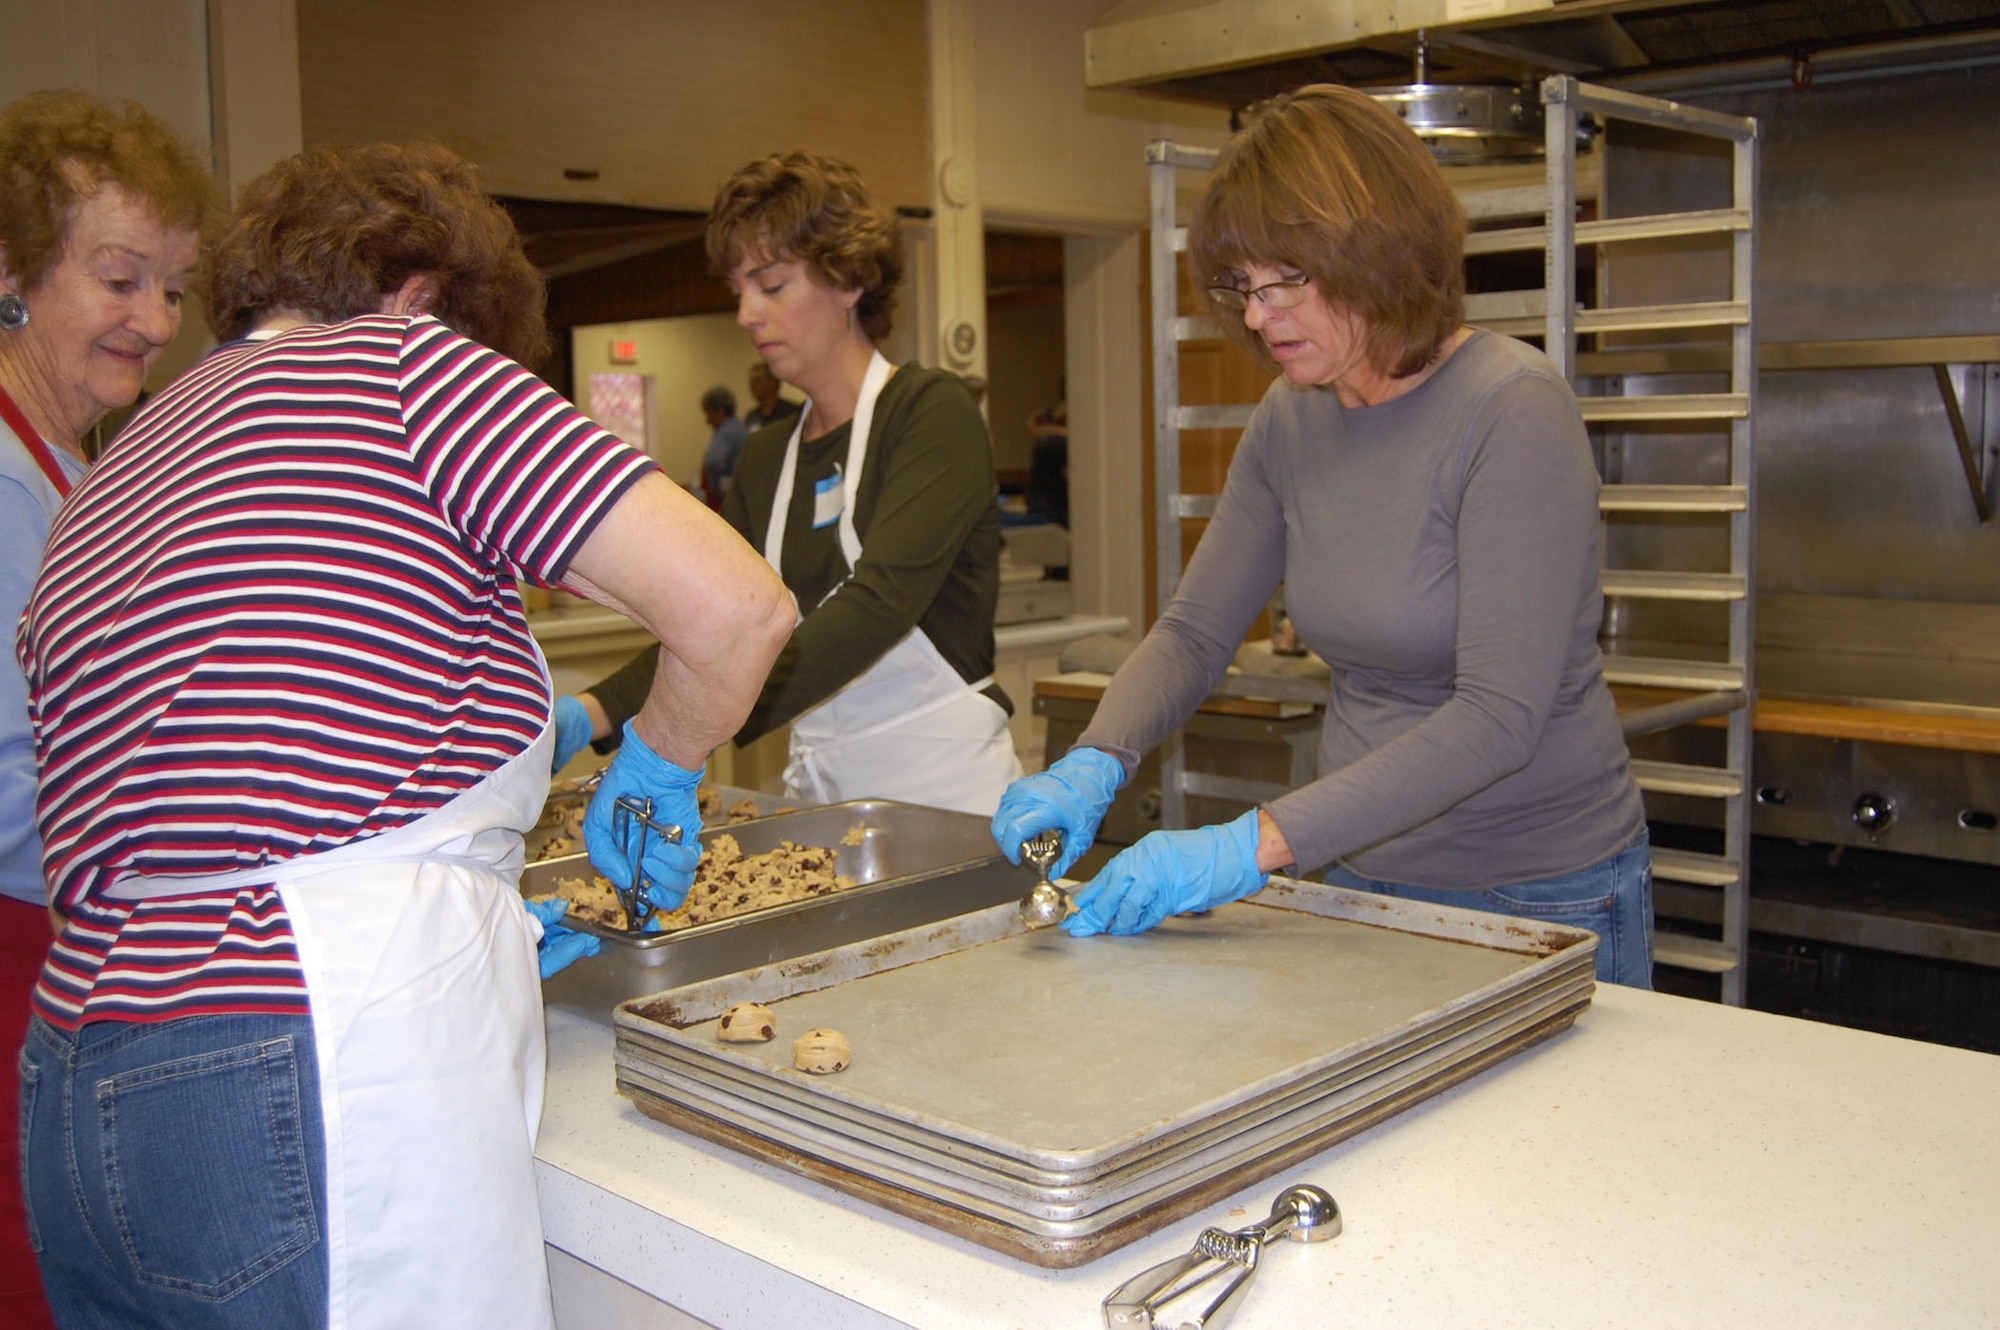 Volunteers for Operation Happy Holidays scoop chocolate chip cookie dough onto baking pans Dec. 1. (U.S. Air Force photo/Valerie Mullett)